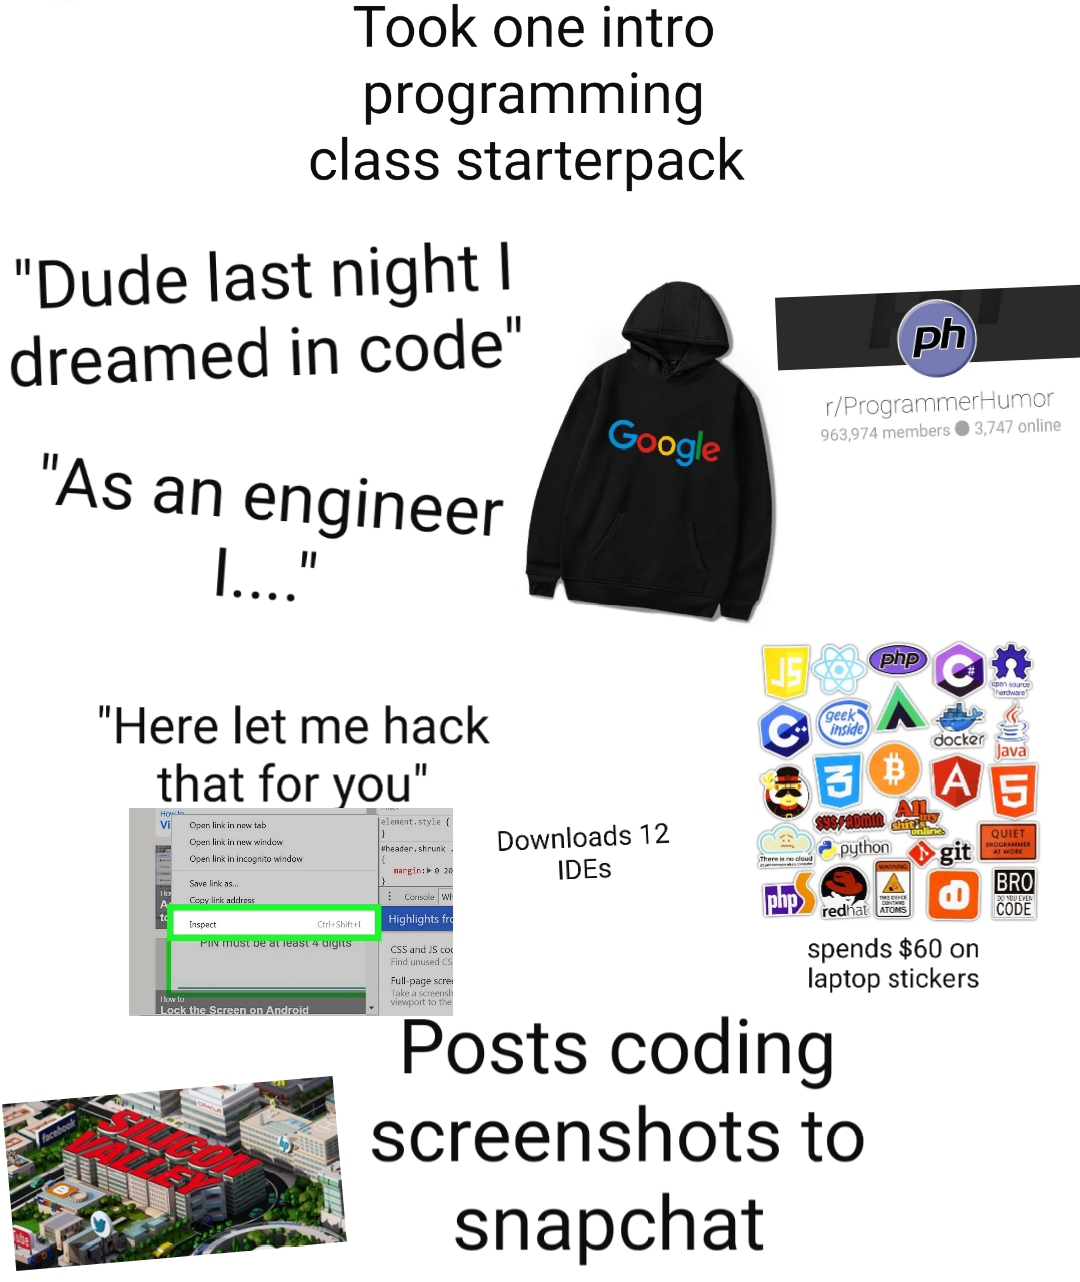 took one programming class starter pack - Took one intro programming class starterpack "Dude last night! dreamed in code" ph TProgrammerHumor Google "As an engineer 1. " "Here let me hack that for you" Downloads 12 C hongit Ides spends $60 on laptop stick